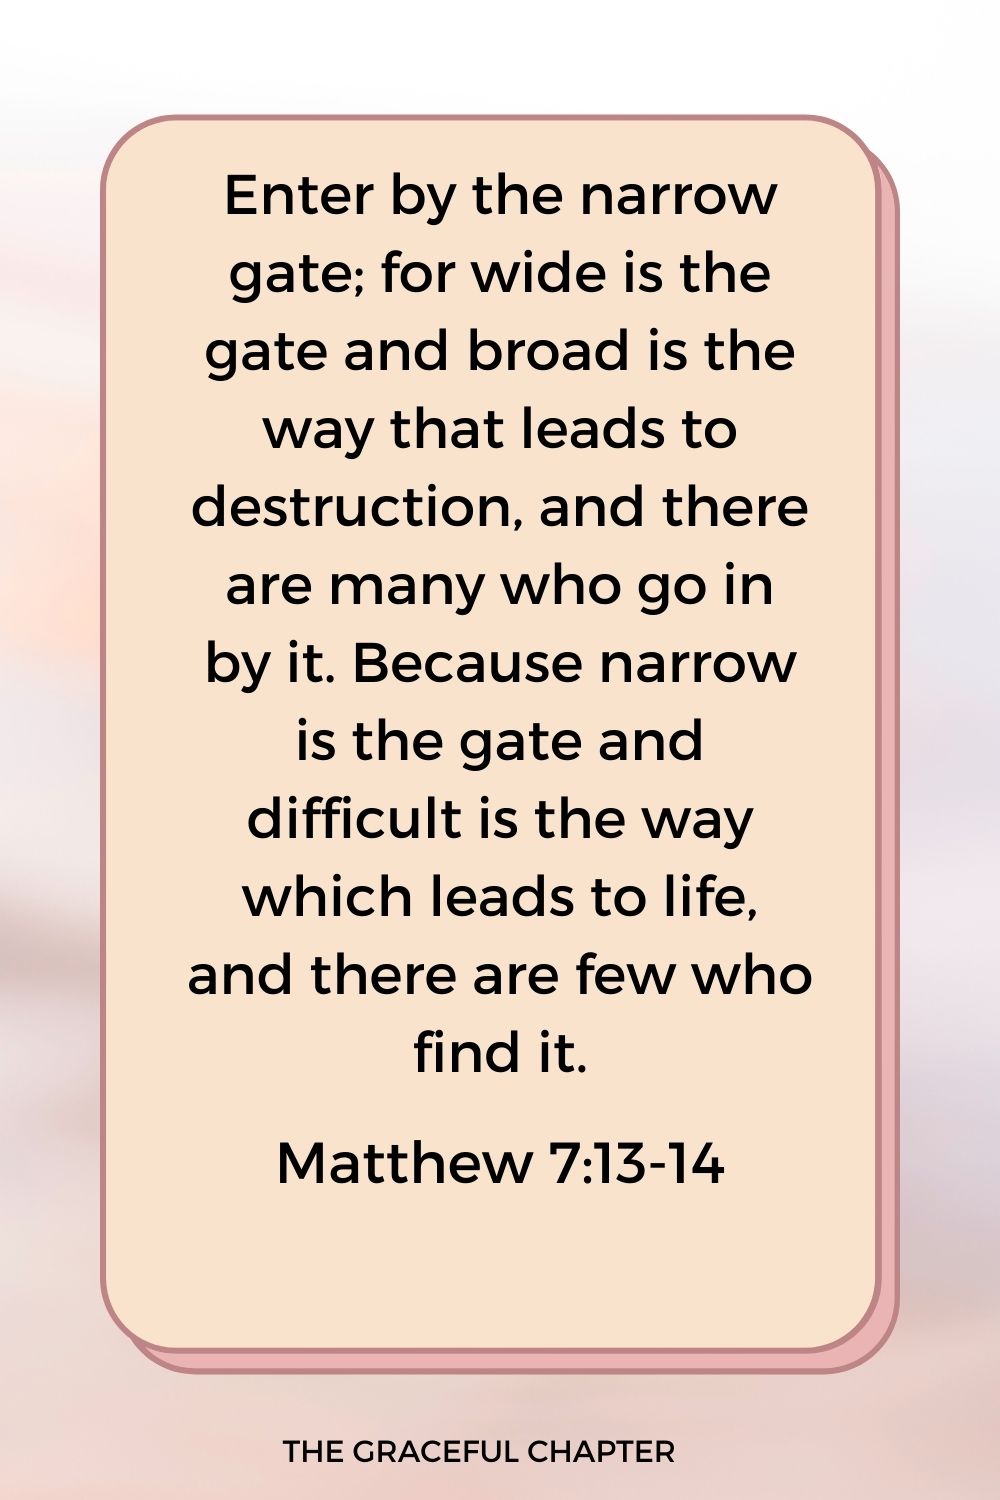 Enter by the narrow gate; for wide is the gate and broad is the way that leads to destruction, and there are many who go in by it. Because narrow is the gate and difficult is the way which leads to life, and there are few who find it. Matthew 7:13-14